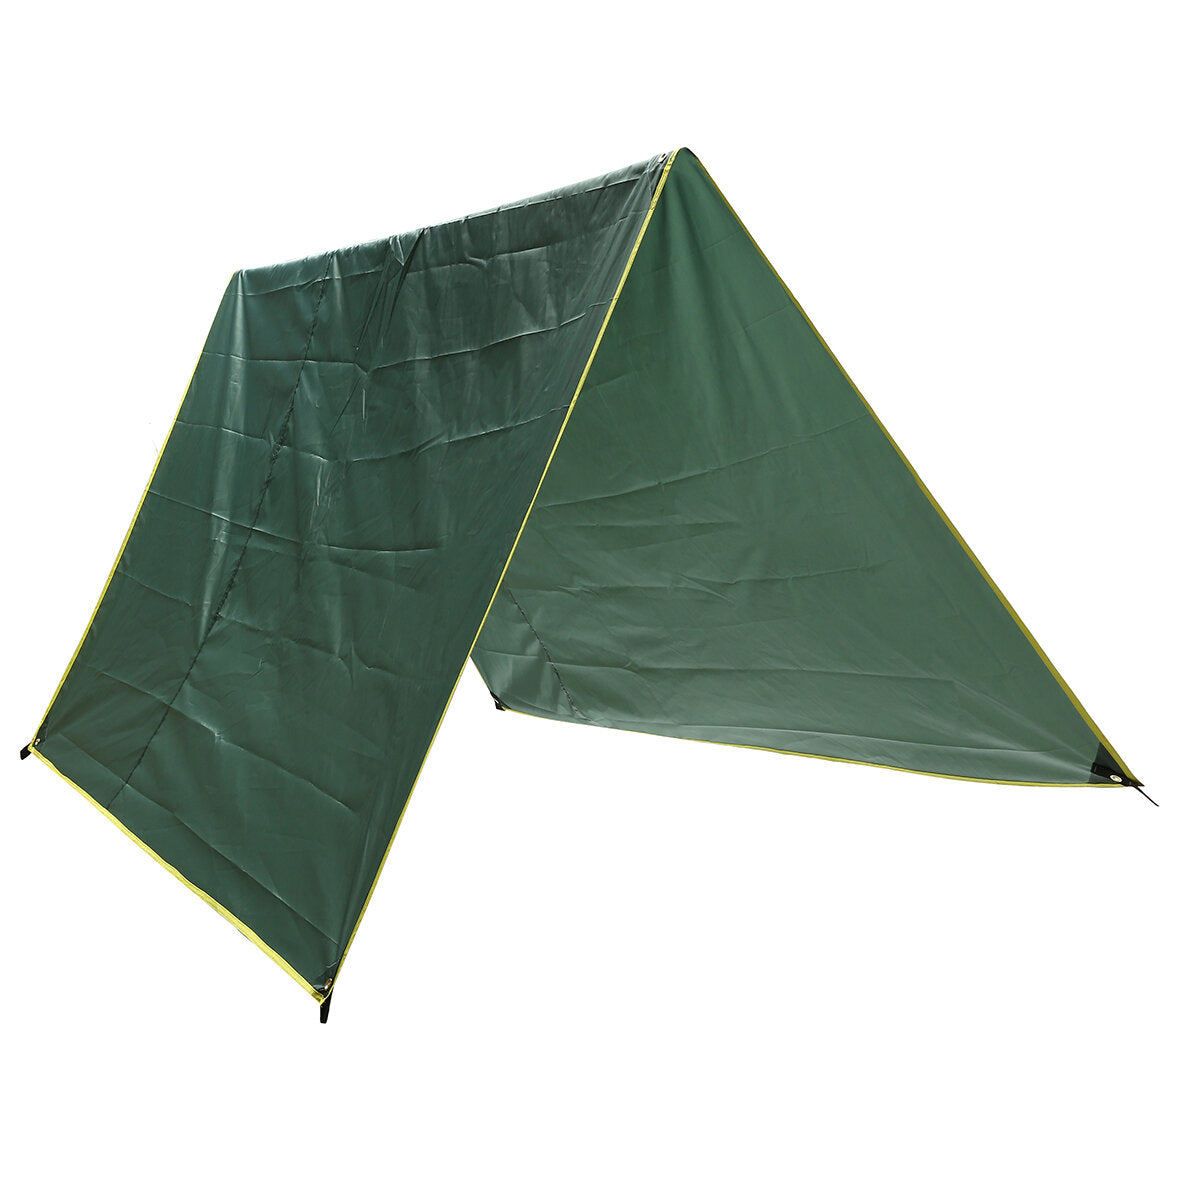 275*275CM Camping Tarp Made Of 420D Oxford Cloth Sunshade UV Protection Lightweight Shelters With 6 Aluminum Ground Studs&6 pieces of 3m Buckle Rope